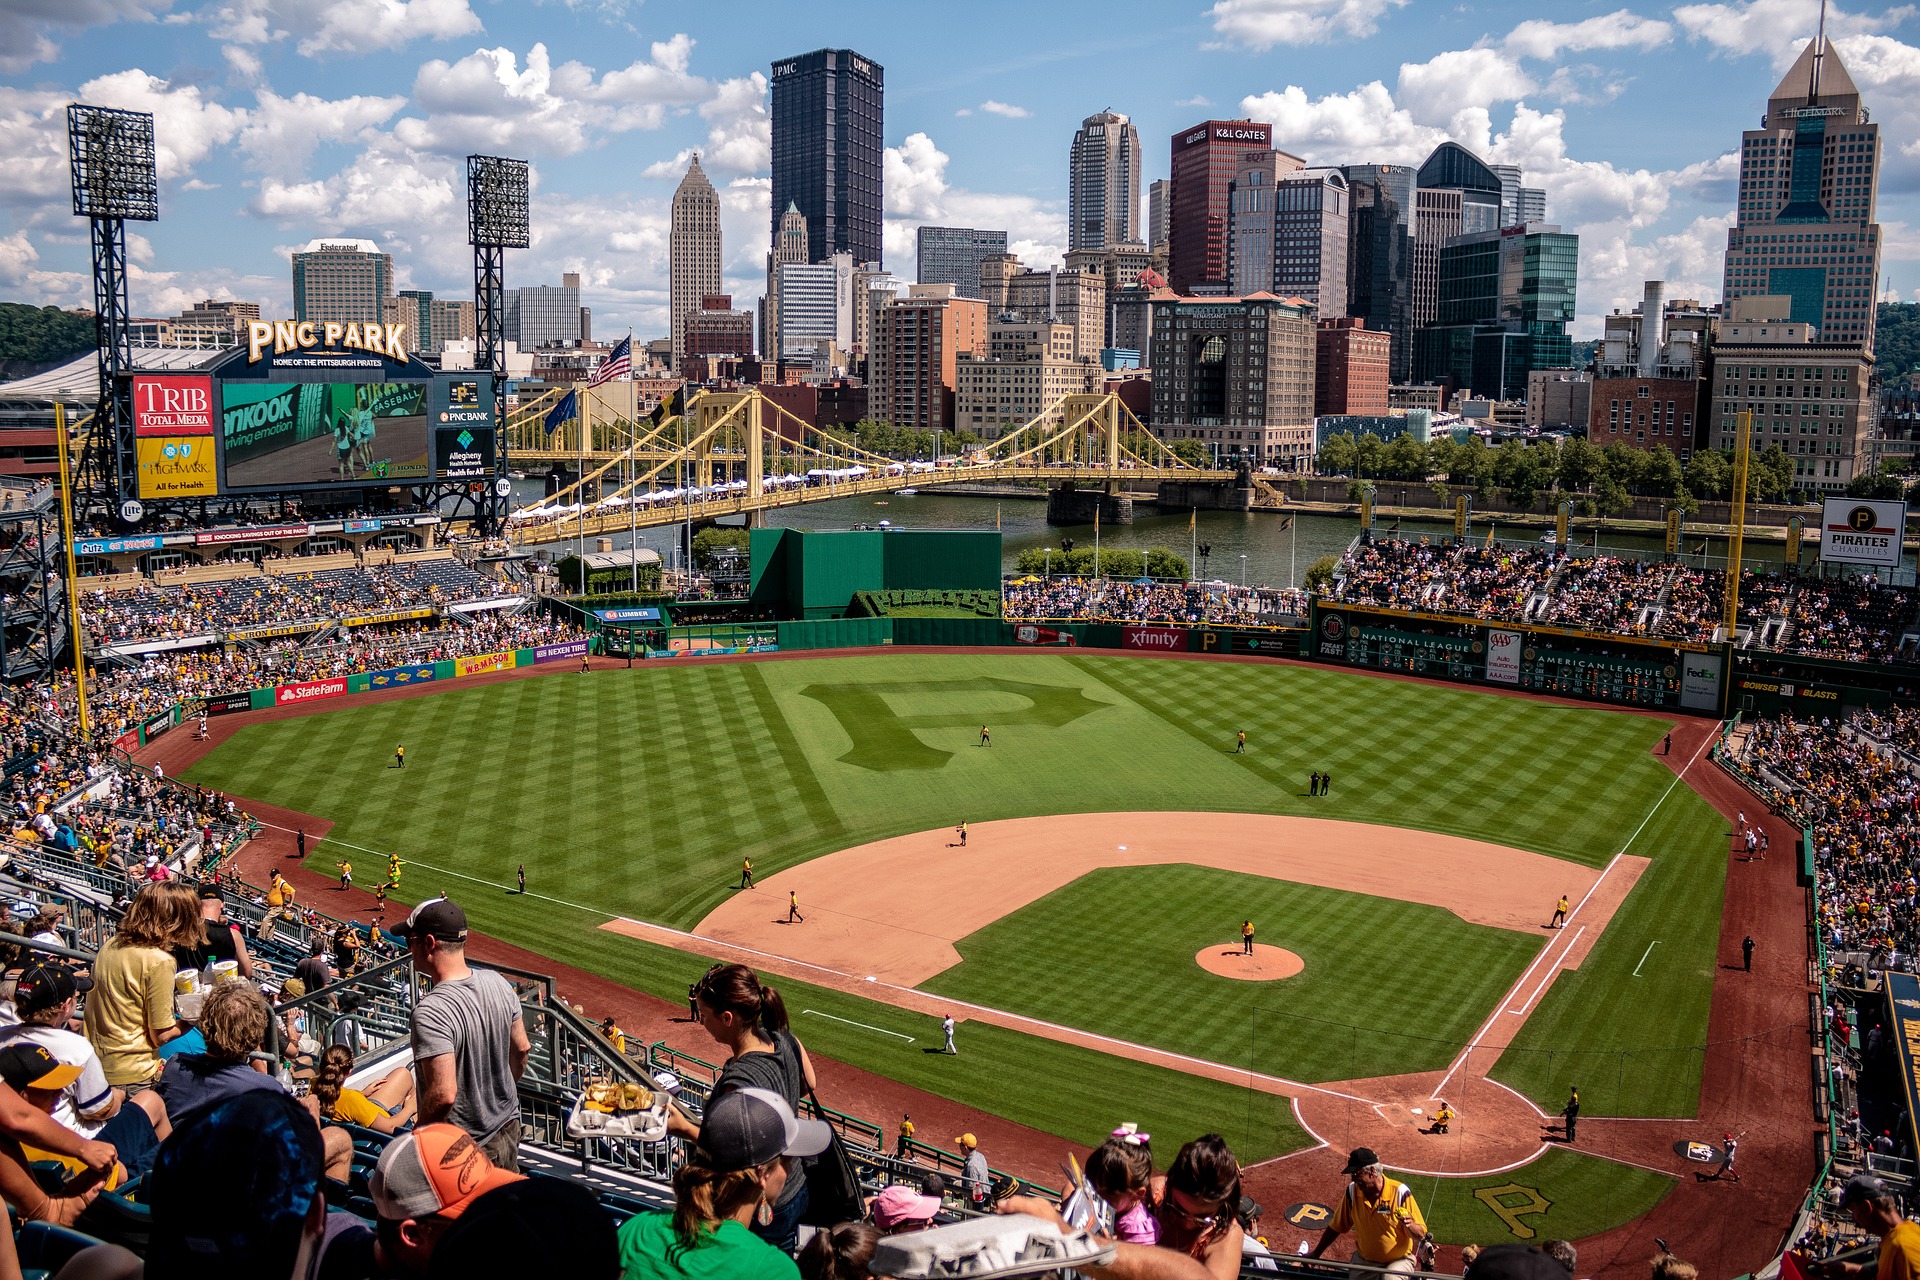 Image of Pittsburgh Pirates Stadium, filled with fans, with city skyline in the background. Image is meant to illustrate that employee homelessness is prevalent in big cities. Image by Pexels from Pixabay